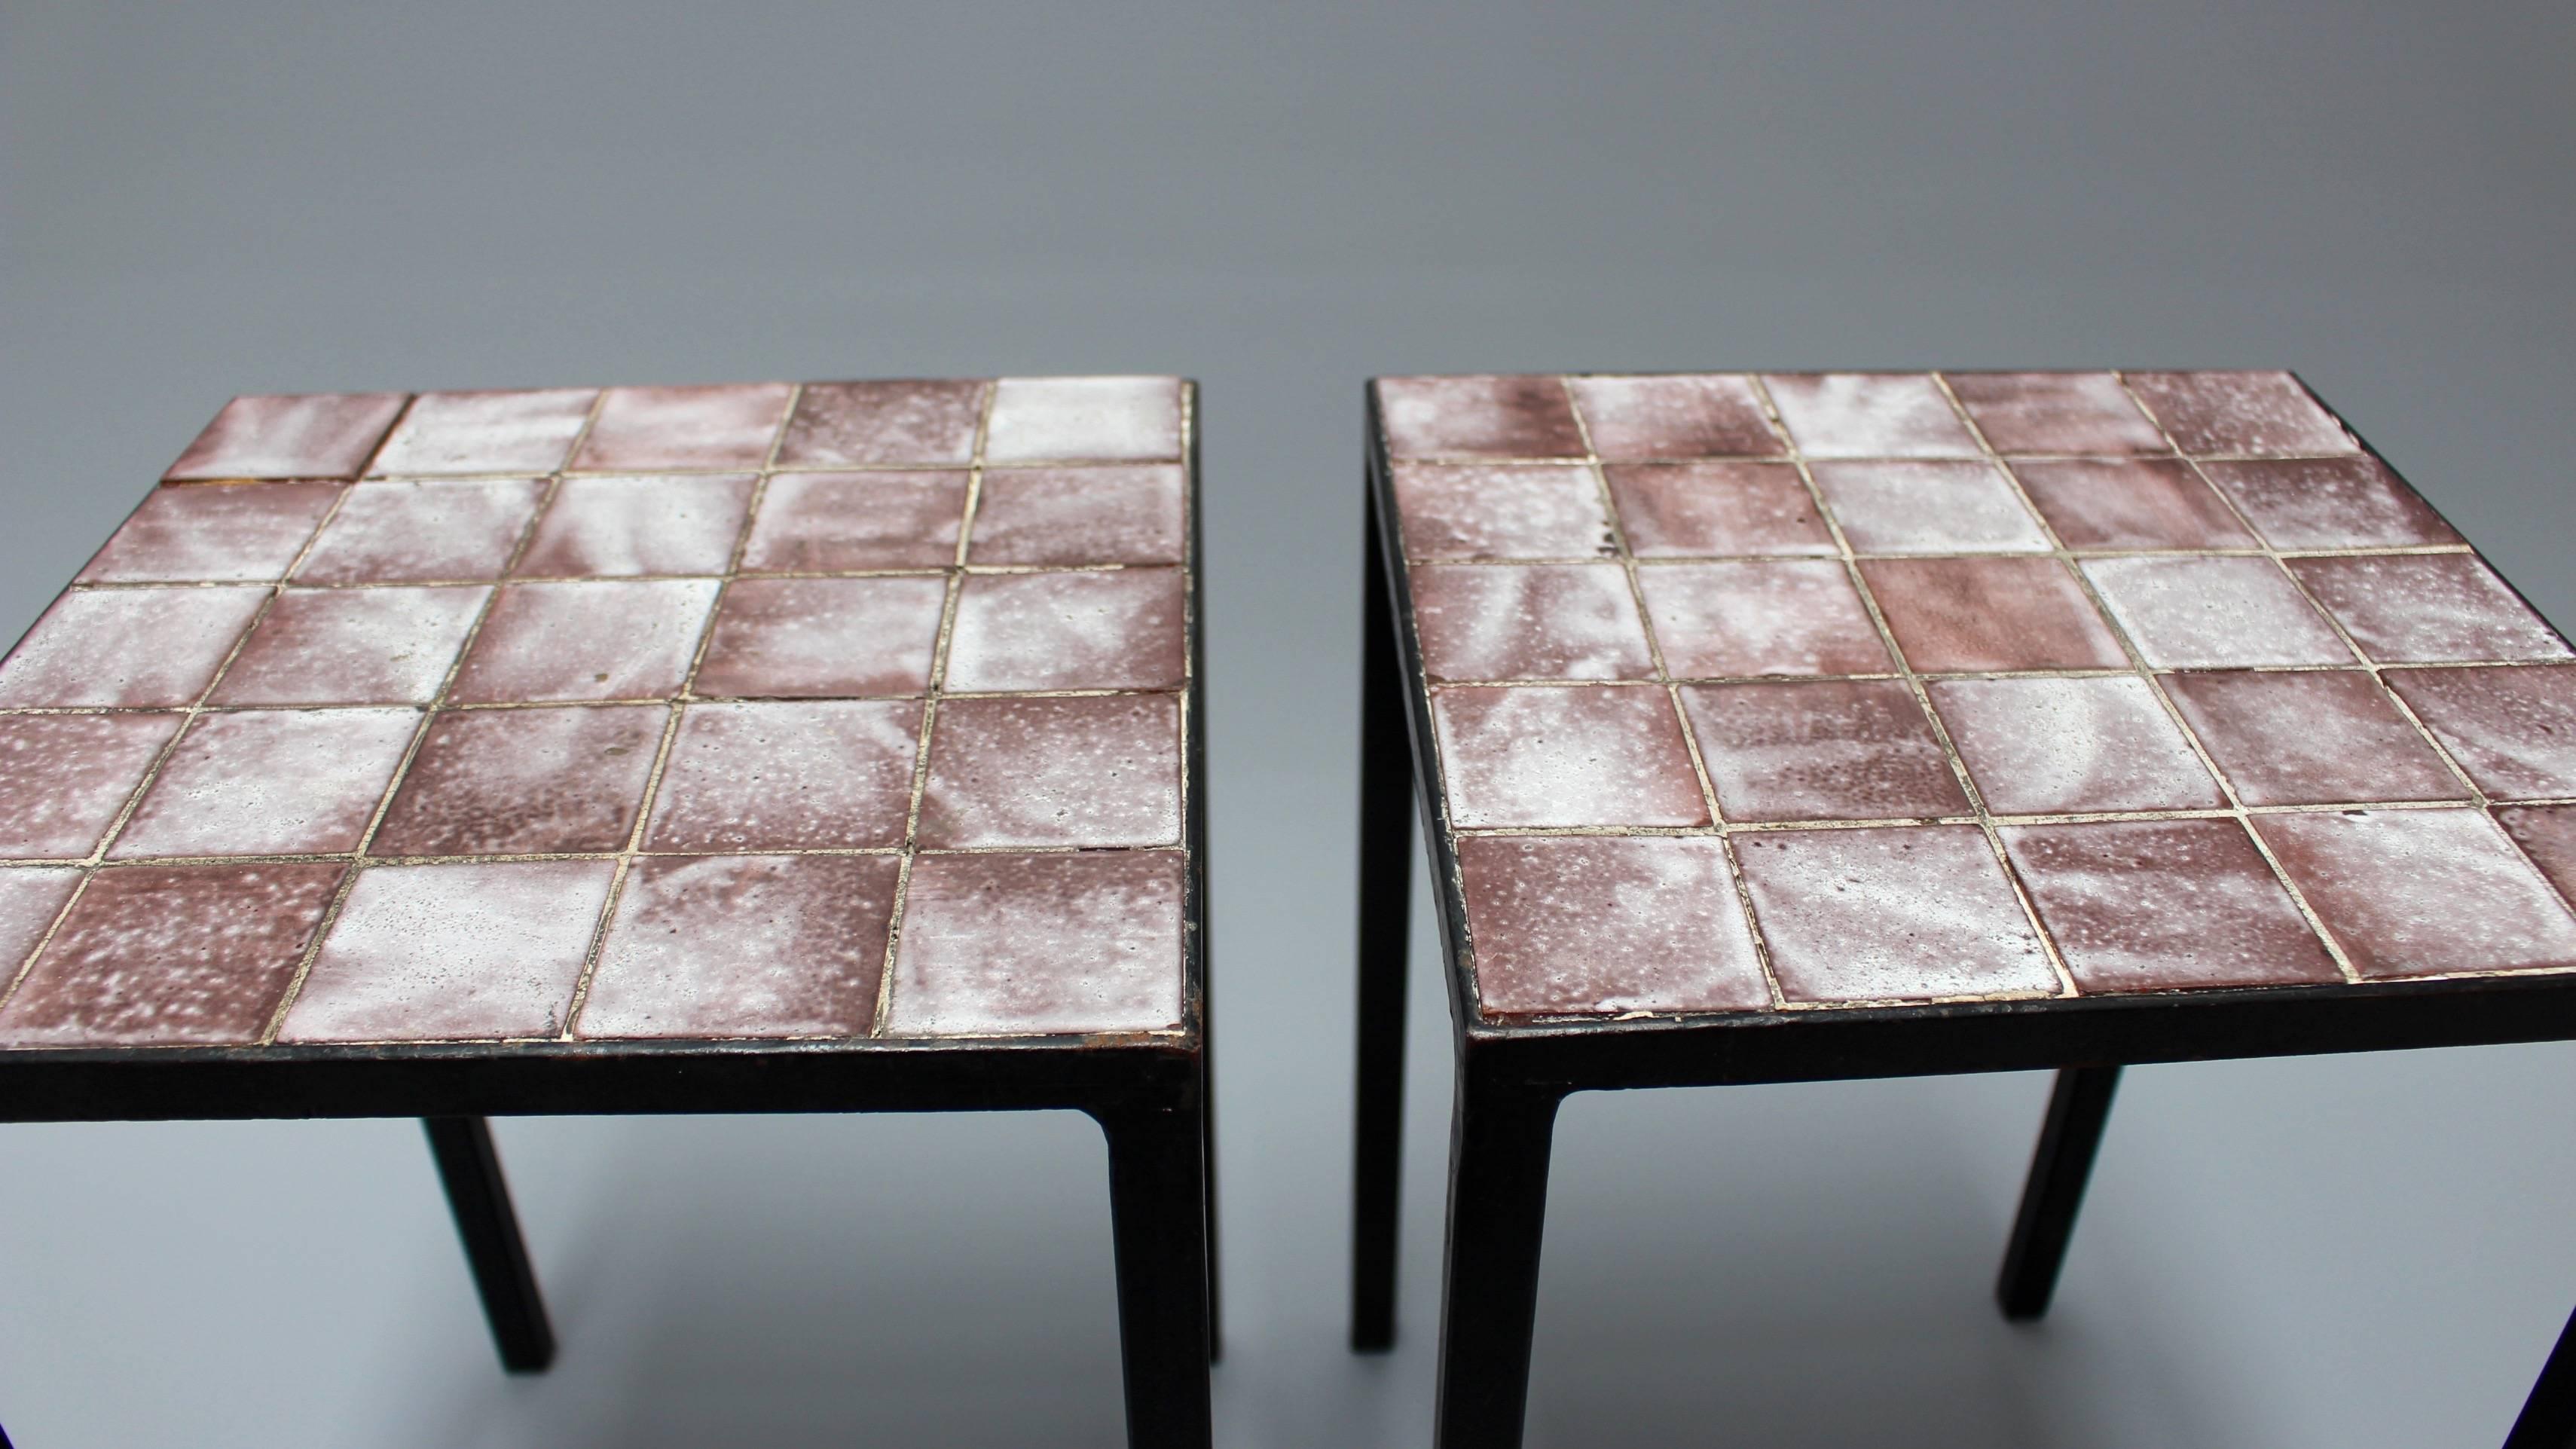 Set of Two Purple Ceramic Tiled Side Tables by Mado Jolain, circa 1950s -1960s 3